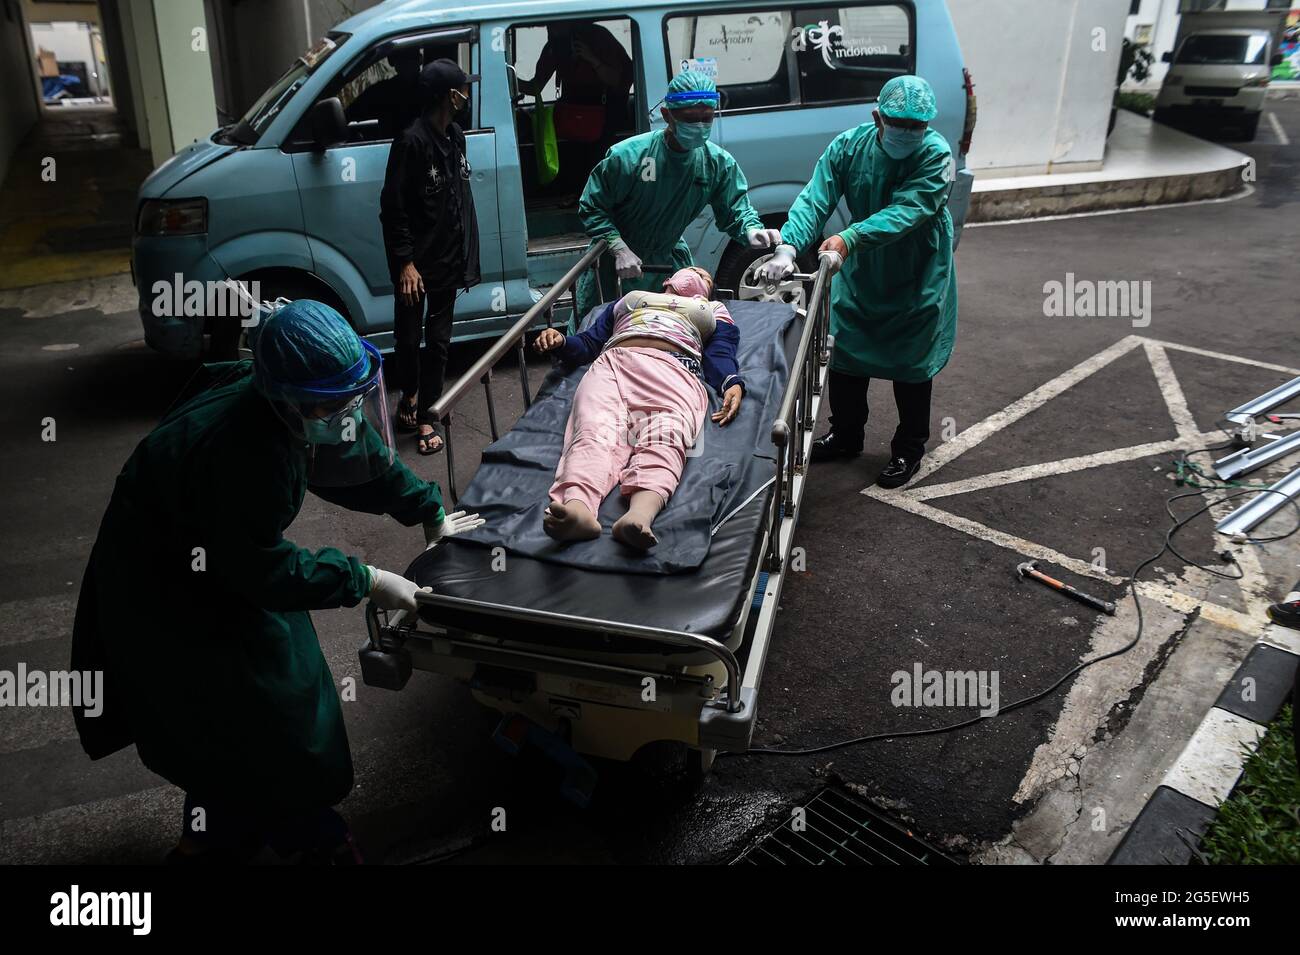 Jakarta, Indonesia. 24th June, 2021. Health workers transfer a patient with high fever in Jakarta, Indonesia, on June 24, 2021. The Health Ministry said on June 26, 2021 that the country recorded 21,095 new COVID-19 cases in the past 24 hours, the highest daily spike since March last year when the first COVID-19 case was detected in the country, bringing the total national tally to 2,093,962. Credit: Agung Kuncahya B./Xinhua/Alamy Live News Stock Photo